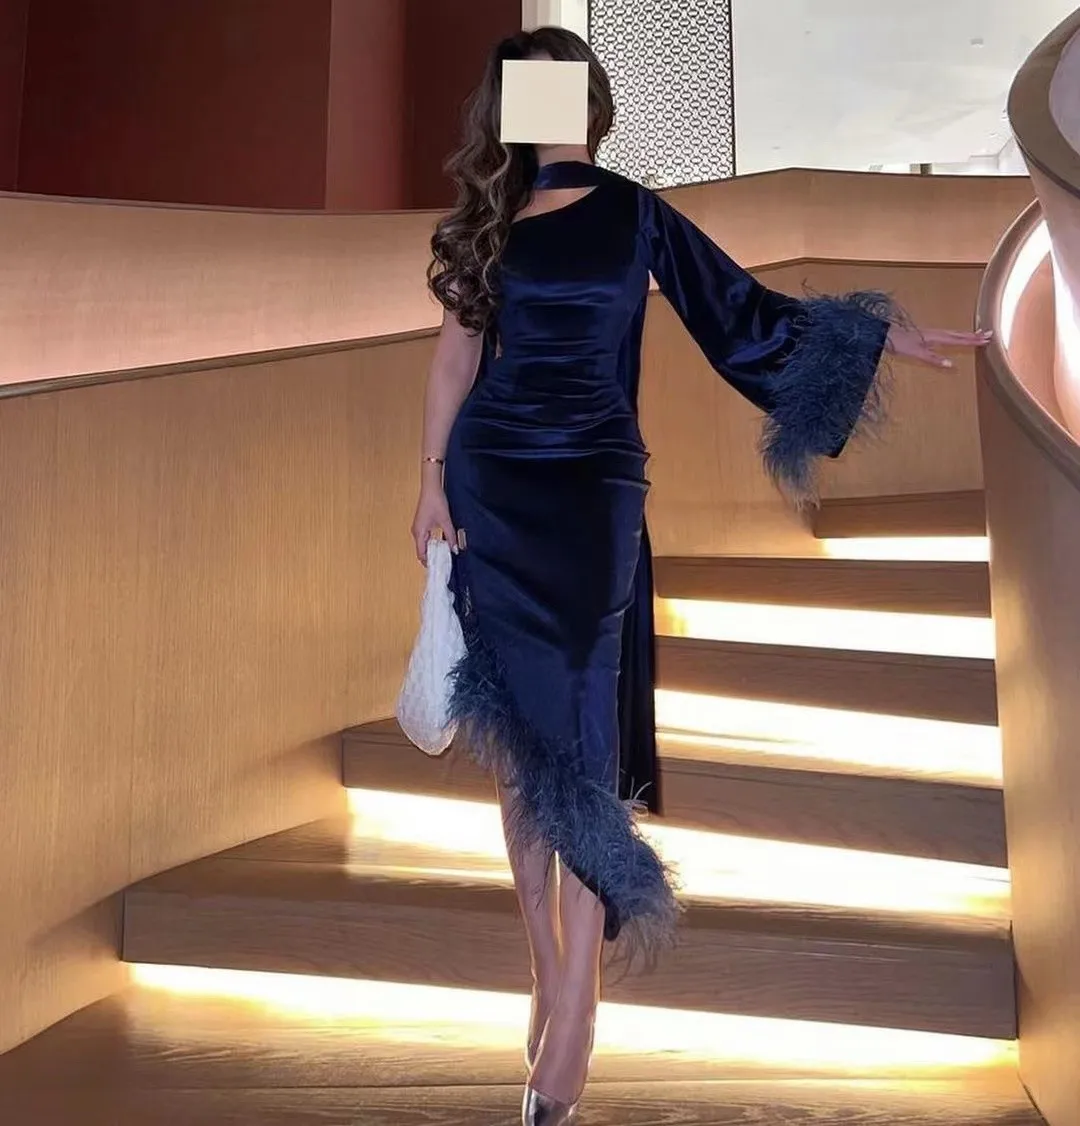 

Fashionvane Navy Blue Velour Asymmetrical Short Prom Dresses Halter One Shoulder Feathers Long Sleeves Cocktail Party Night Club